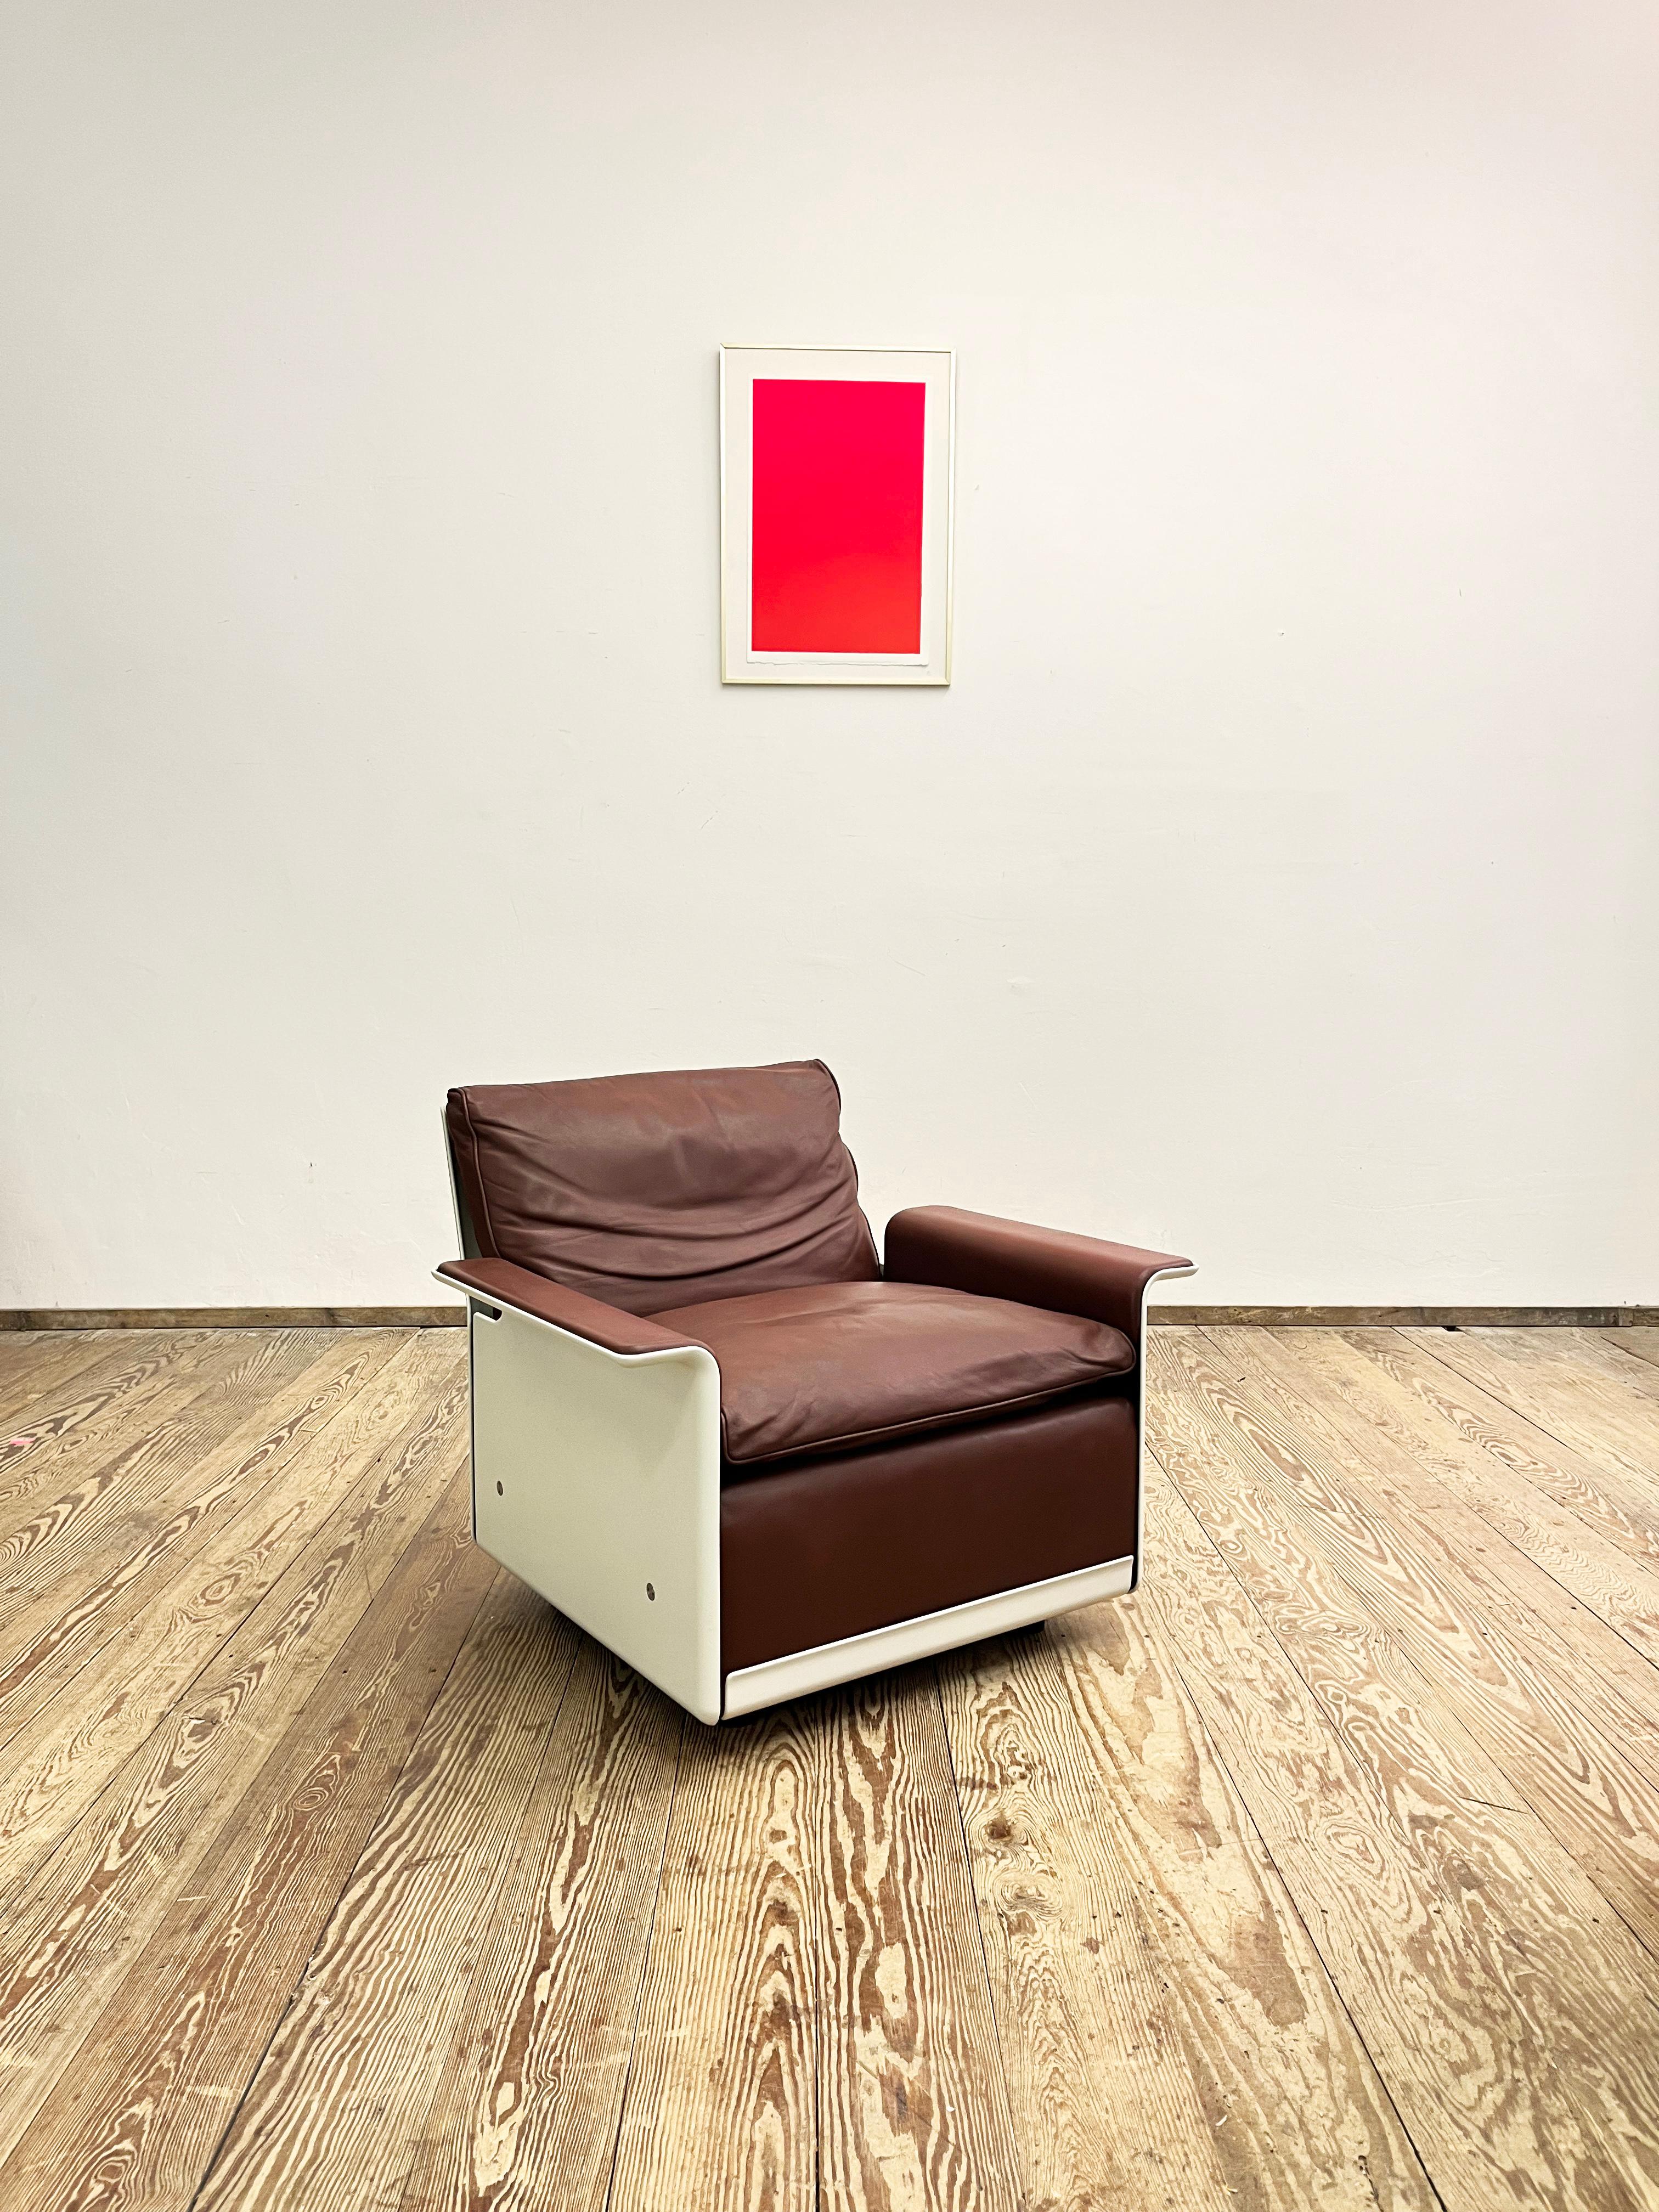 Dimensions ca. 88 x 78 x 65 x 43 cm (WxDxHxSH)

This shapely and comfortable lounge easy chair was designed by German Designer Dieter Rams for Vitsoe in the 1960s in Germany. The 620 series is a system of furniture parts that can be used to create